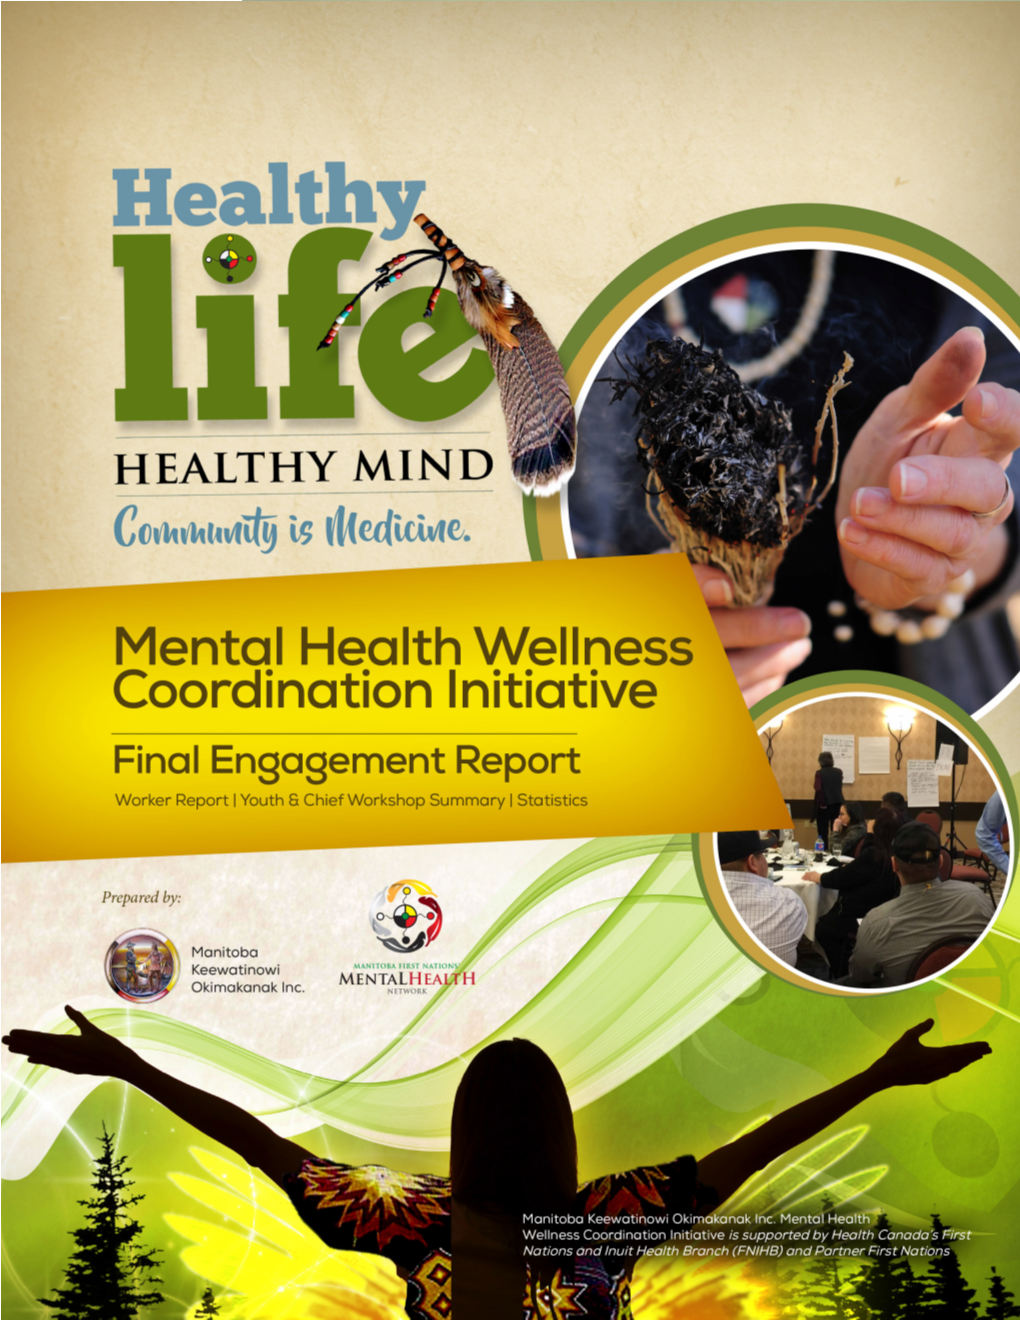 Read the Mental Health and Wellness Coordination Initiative Report